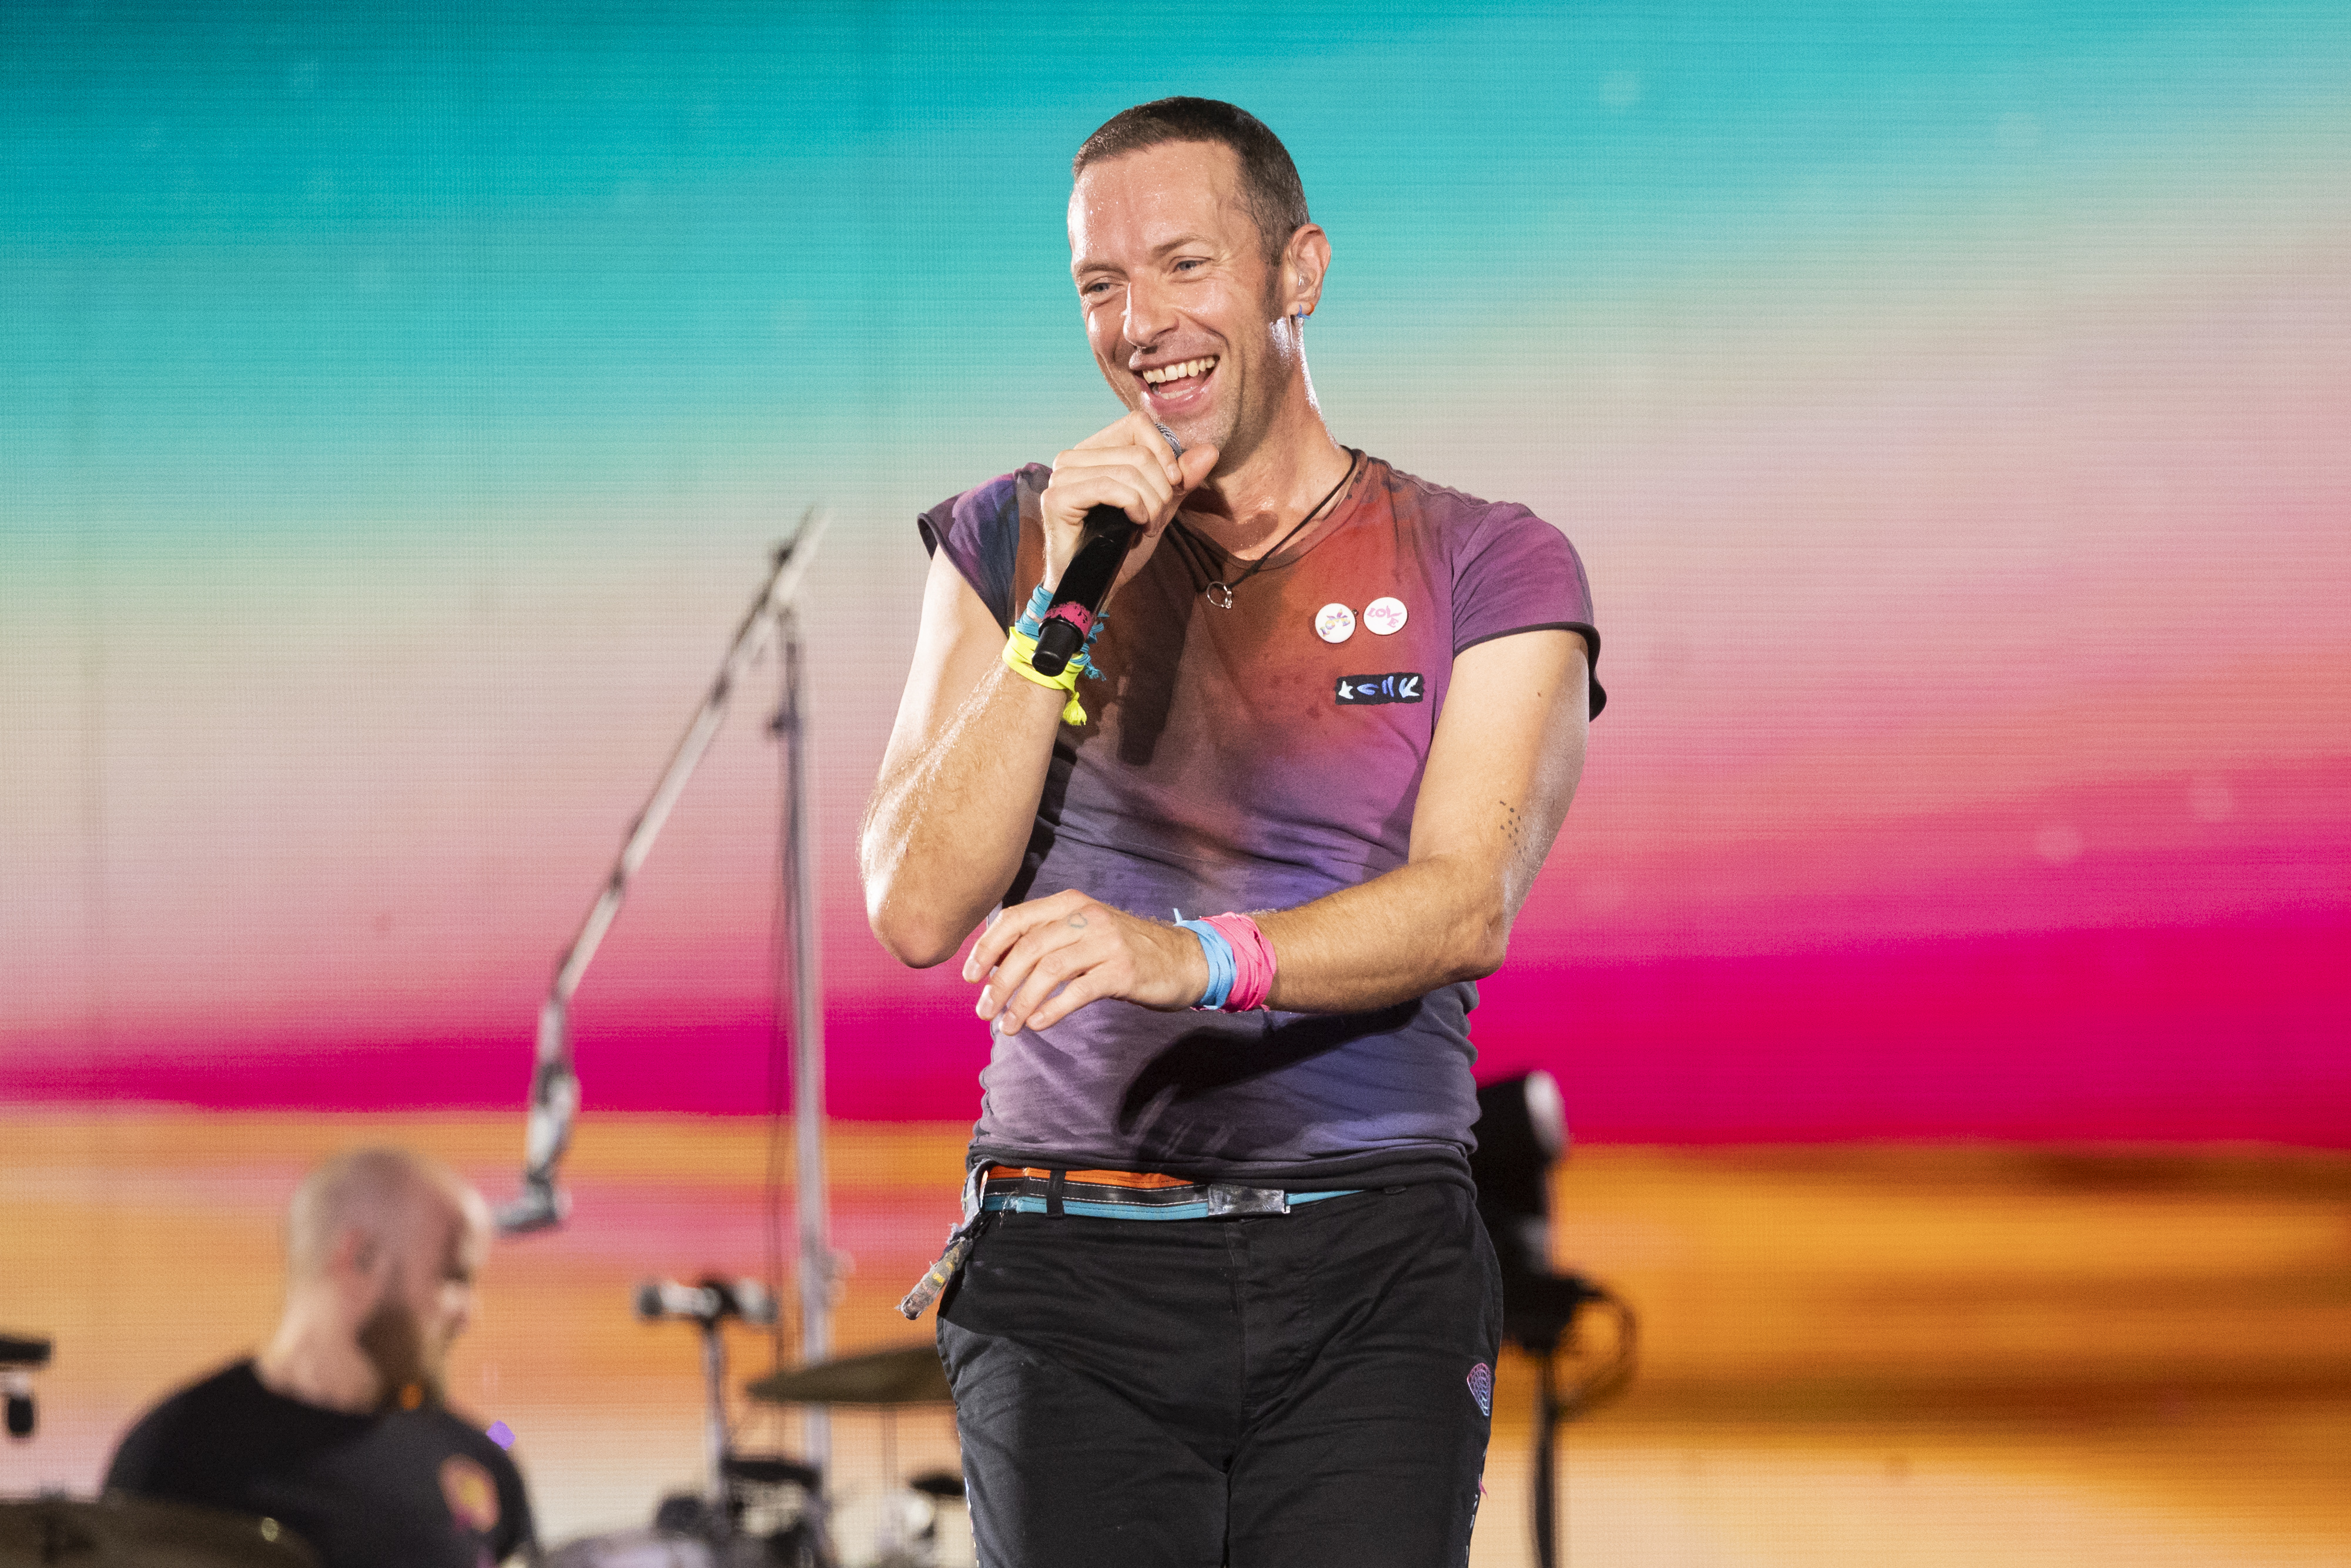 Chris Martin performing during Coldplay's "Music of the Spheres" World Tour in Perth, Australia on November 18, 2023 | Source: Getty Images